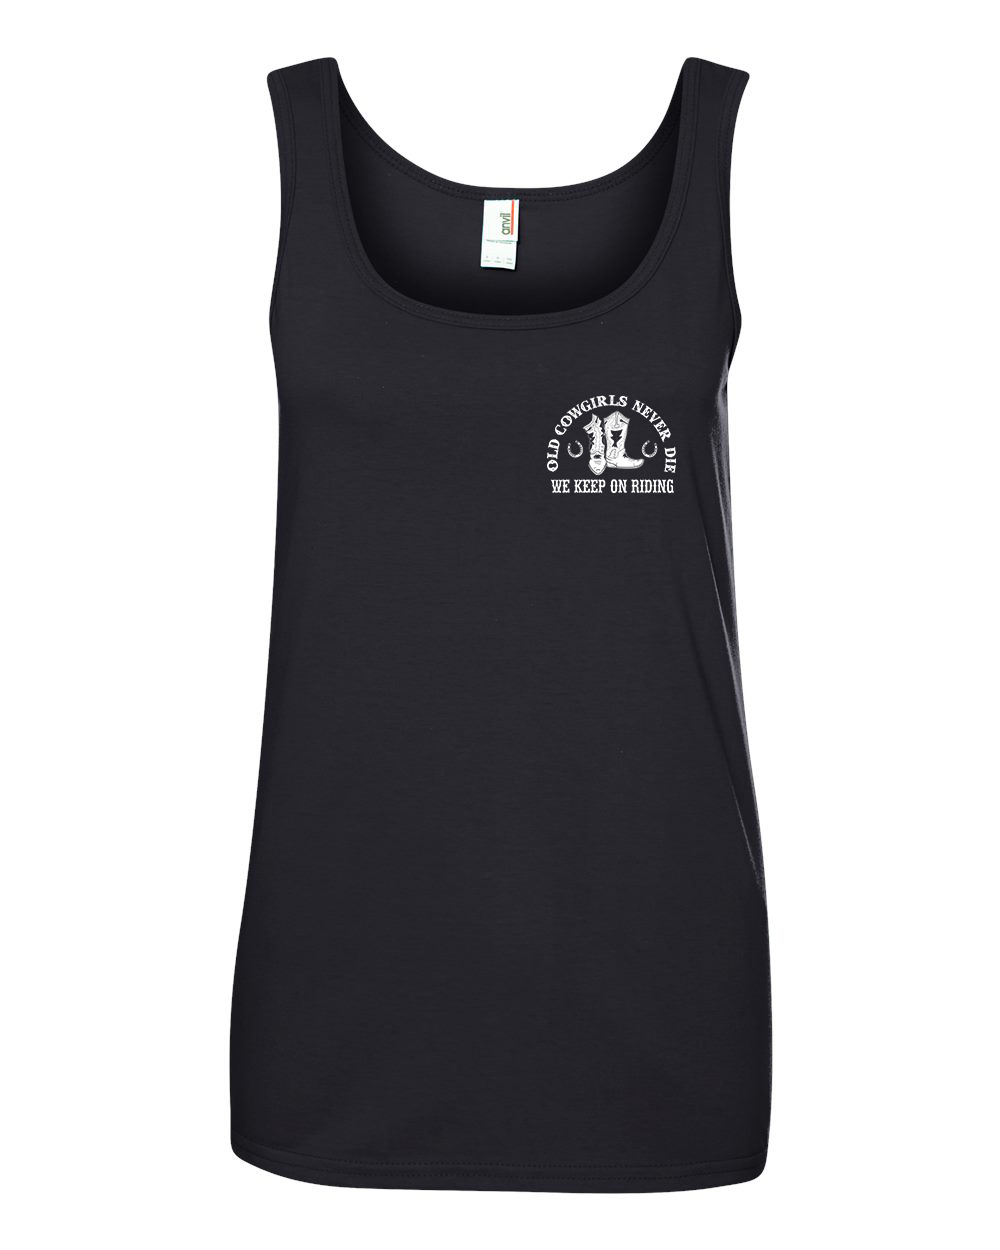 A black tank top with the words " city of york " on it.